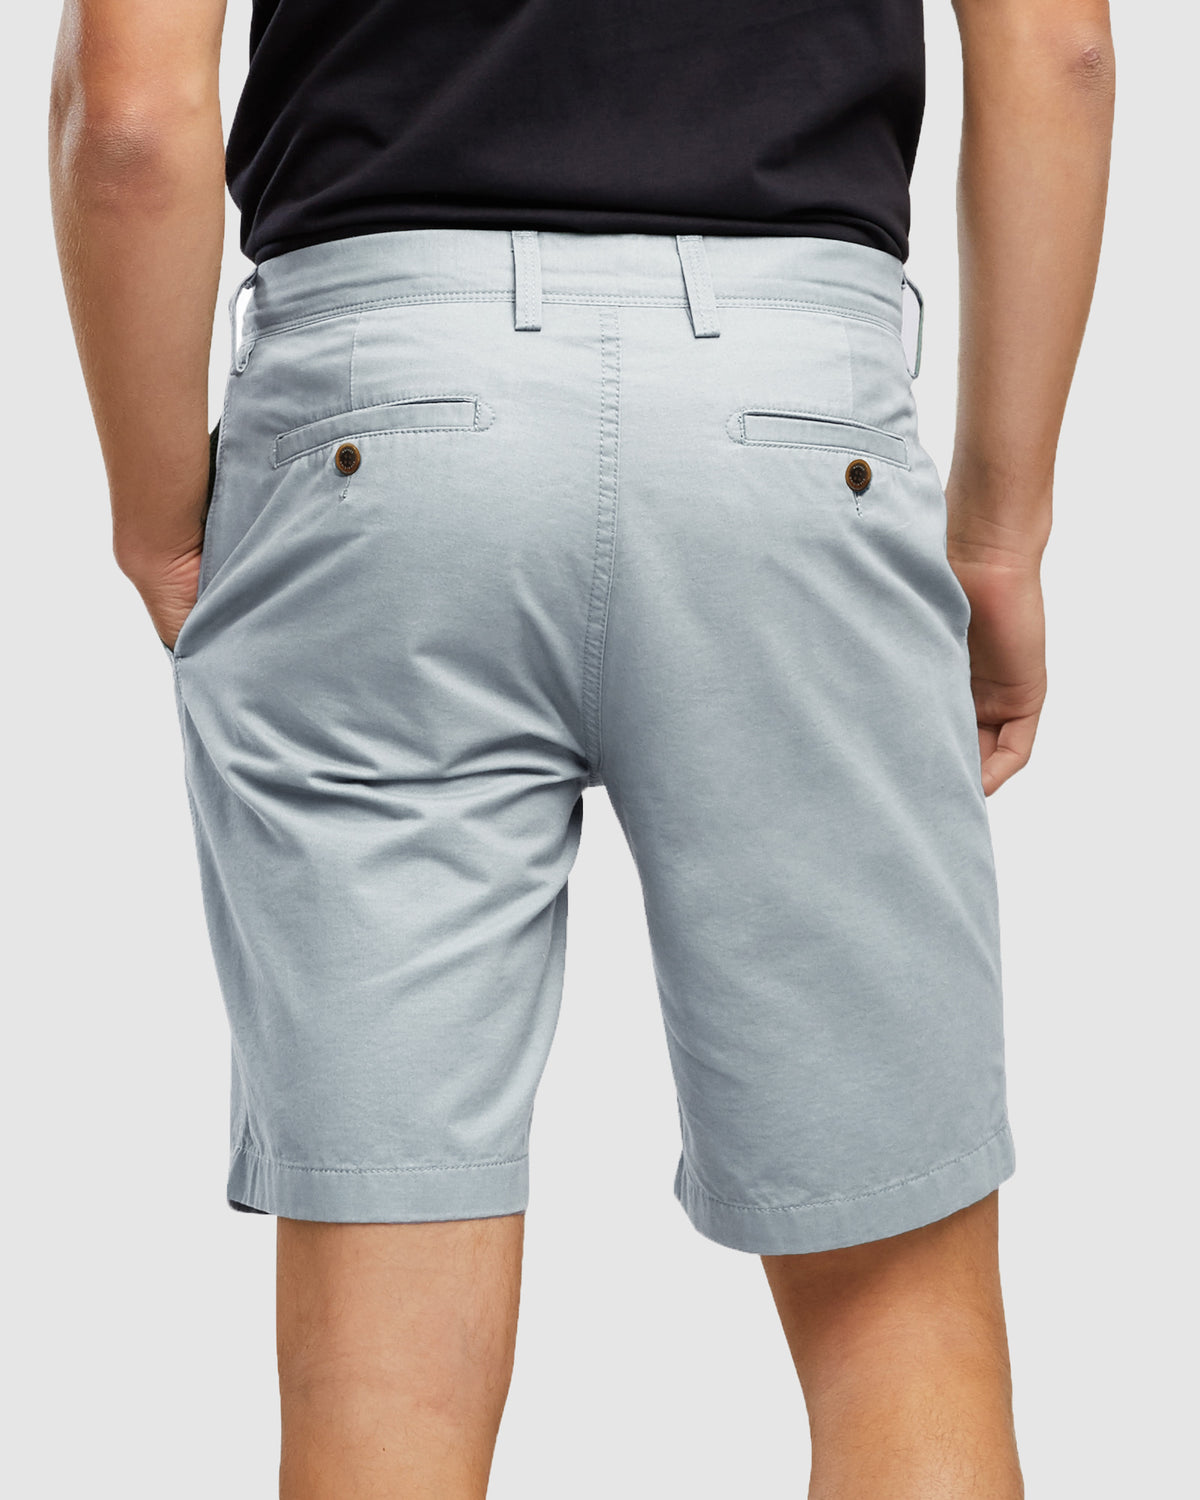 Glacier Performance Shorts with Pockets for Men